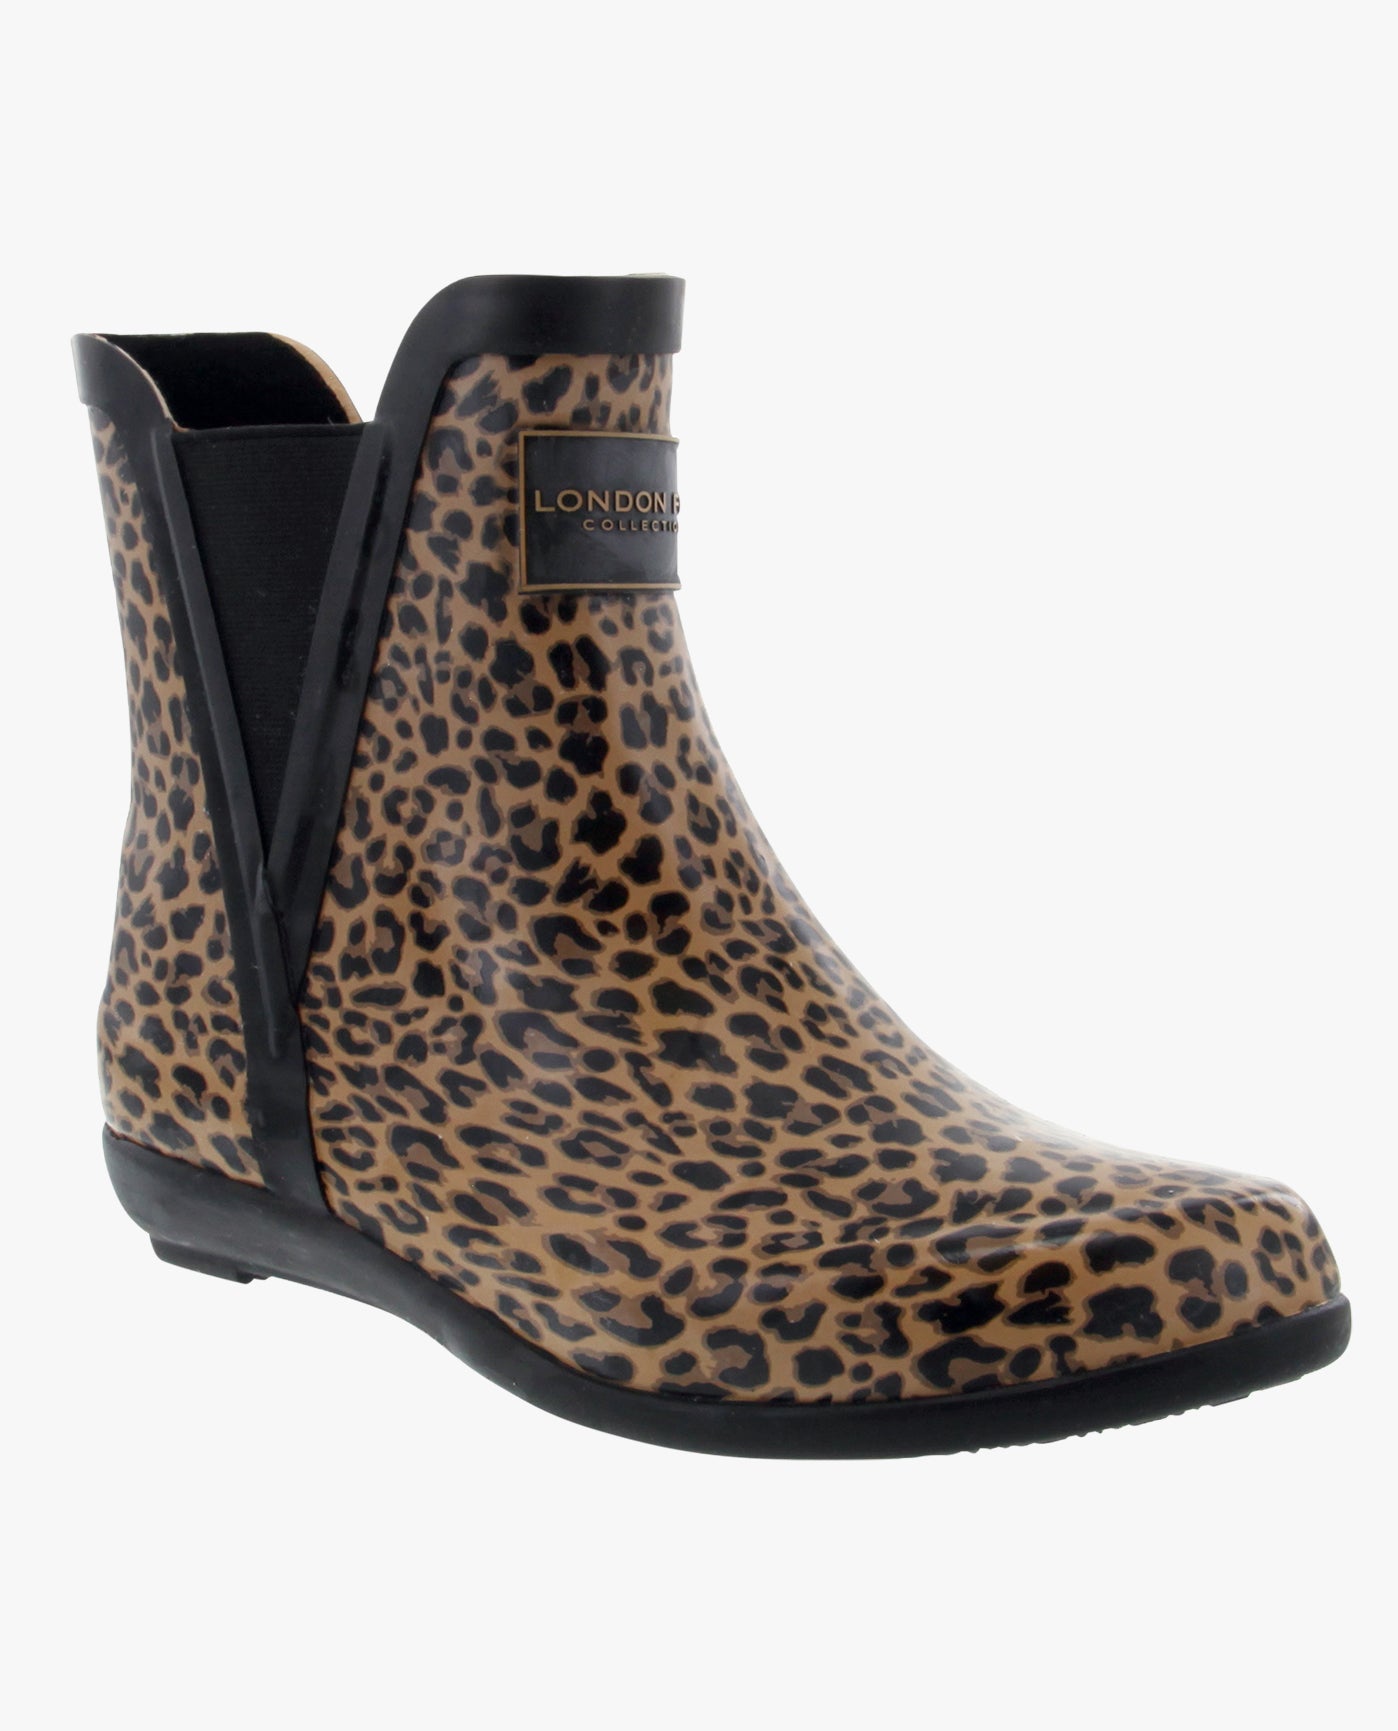 MAIN IMAGE OF WOMENS PICCADILLY ANKLE RAINBOOT | ESO_NEW LEOPARD_204